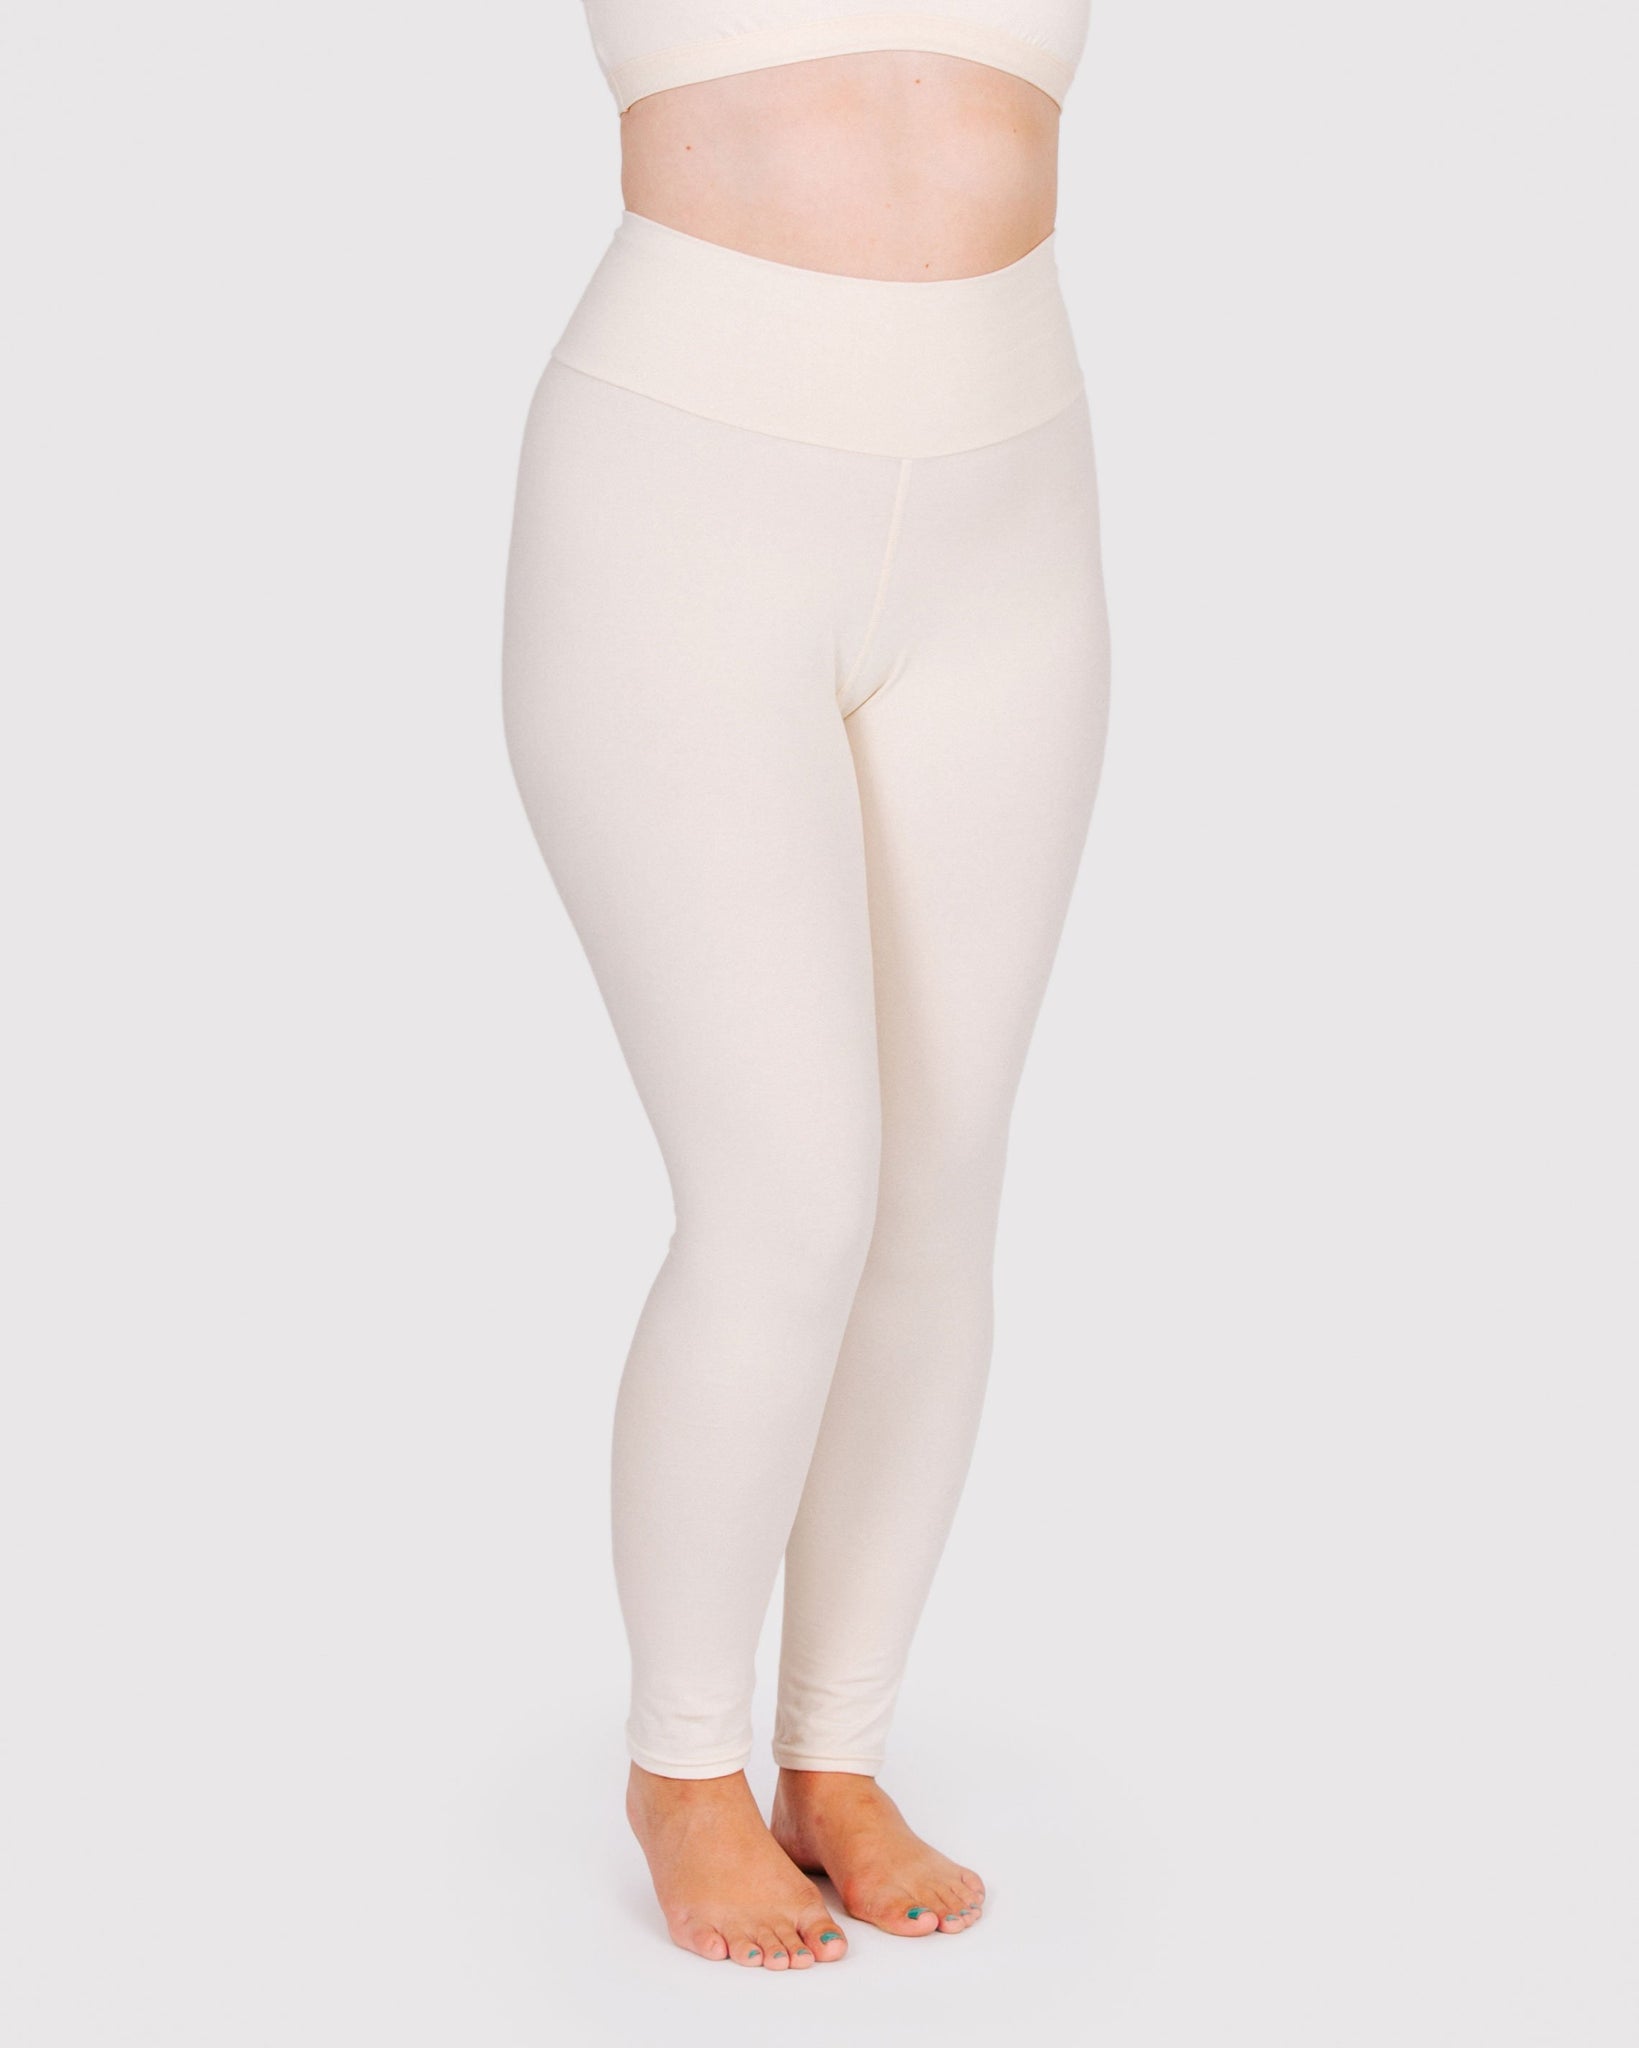 Ankle Fit Mixed Cotton with Spandex Stretchable Leggings Orange